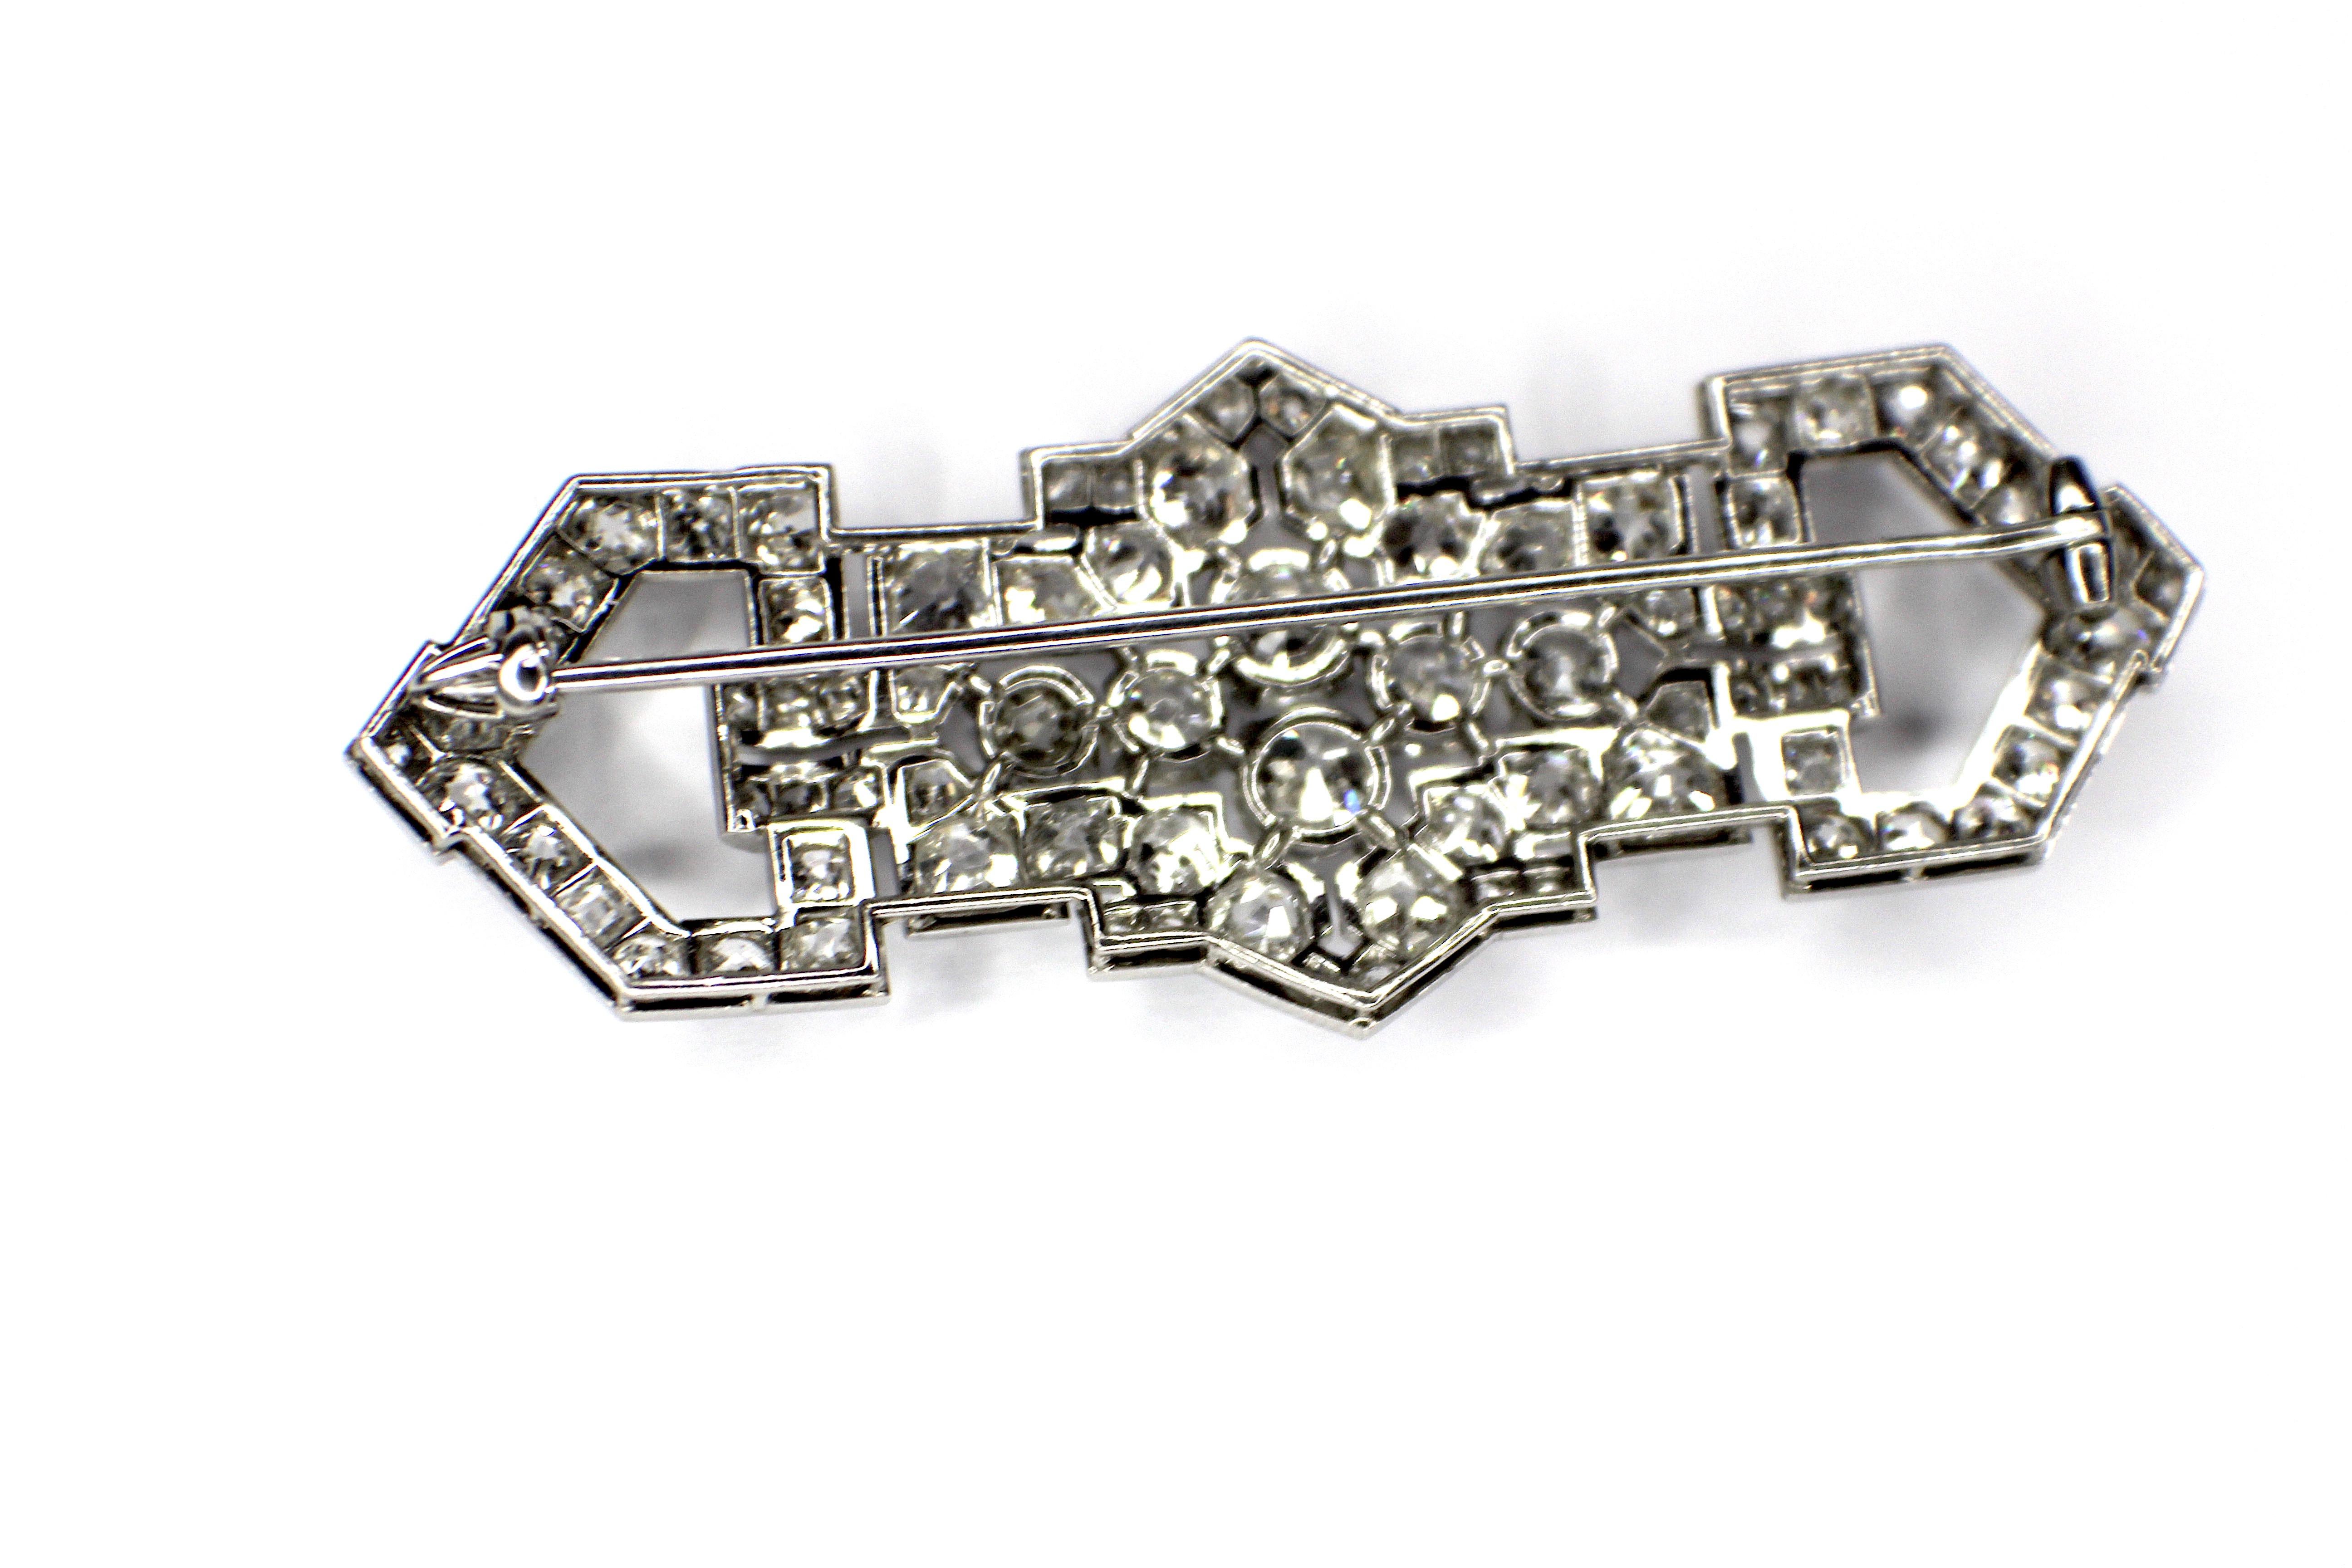 Gemolithos, Art Deco Diamond Brooch, French, by Cartier. Circa 1928 In Good Condition For Sale In Munich, DE